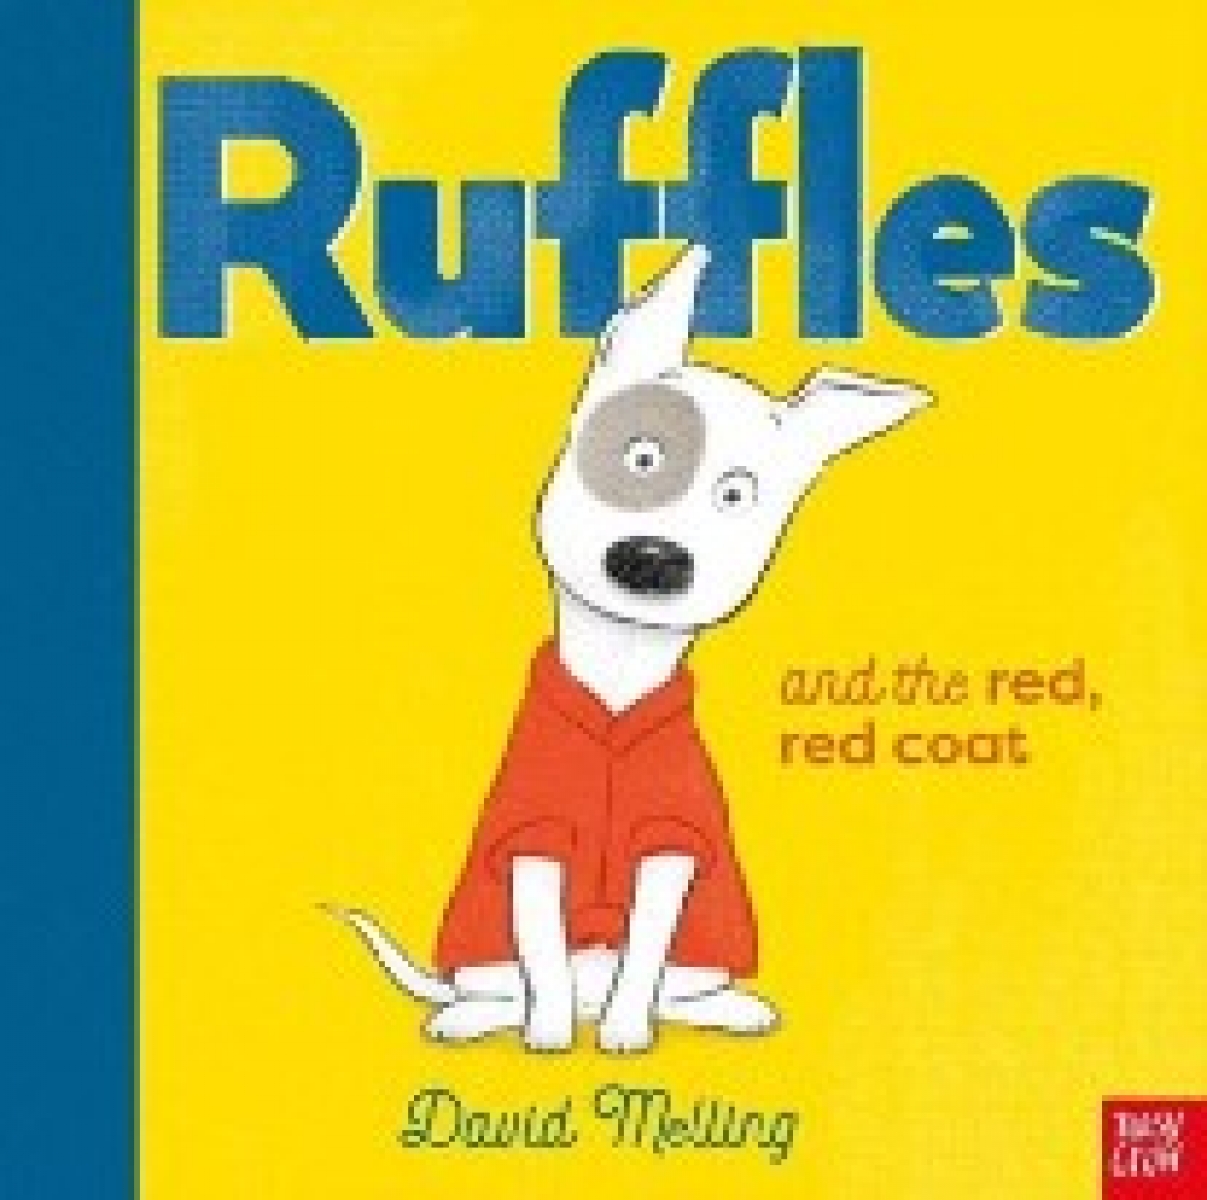 David, Melling Ruffles and the red, red coat 